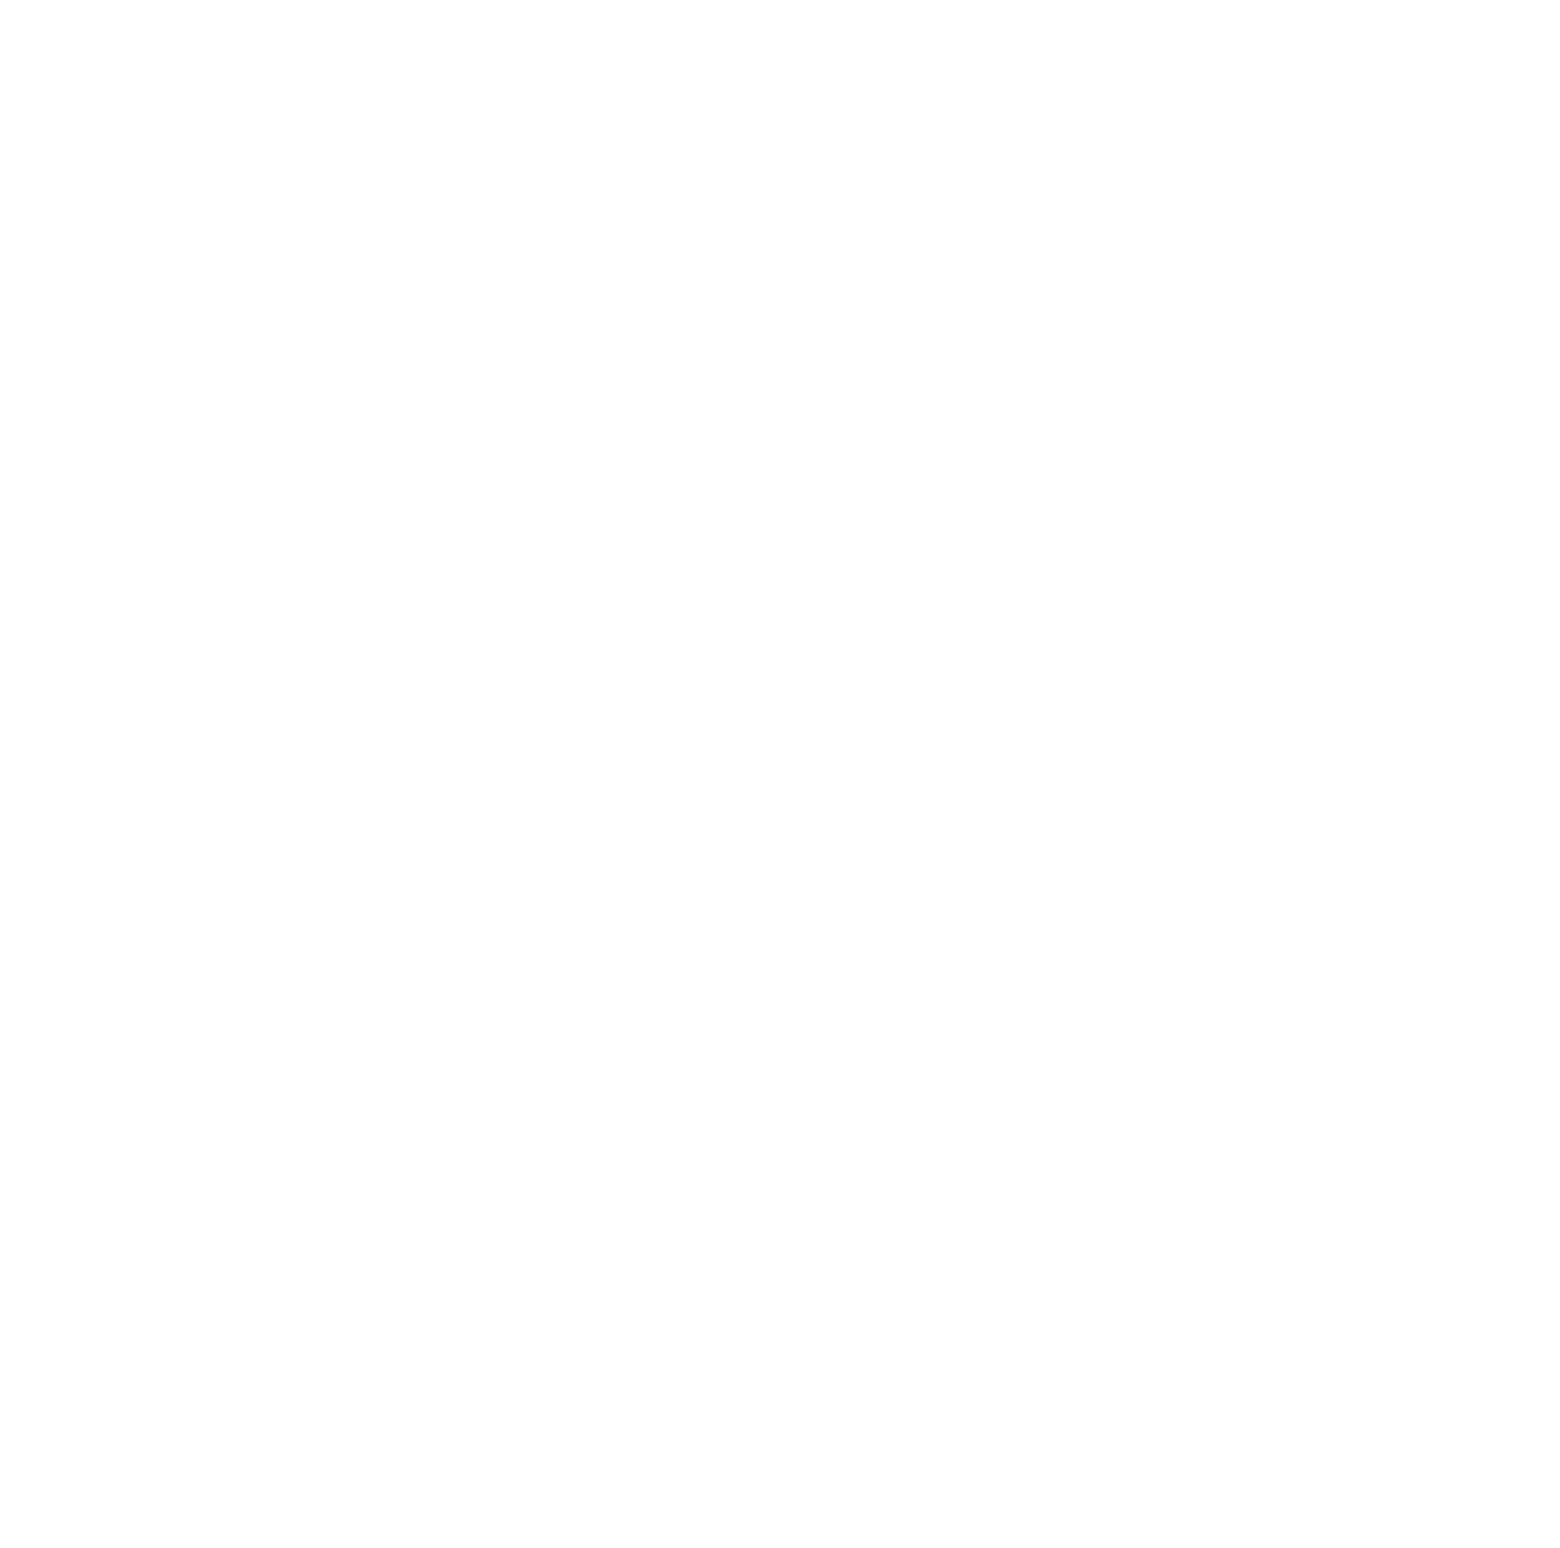 EllaHellas
Sign
for
Sustainability